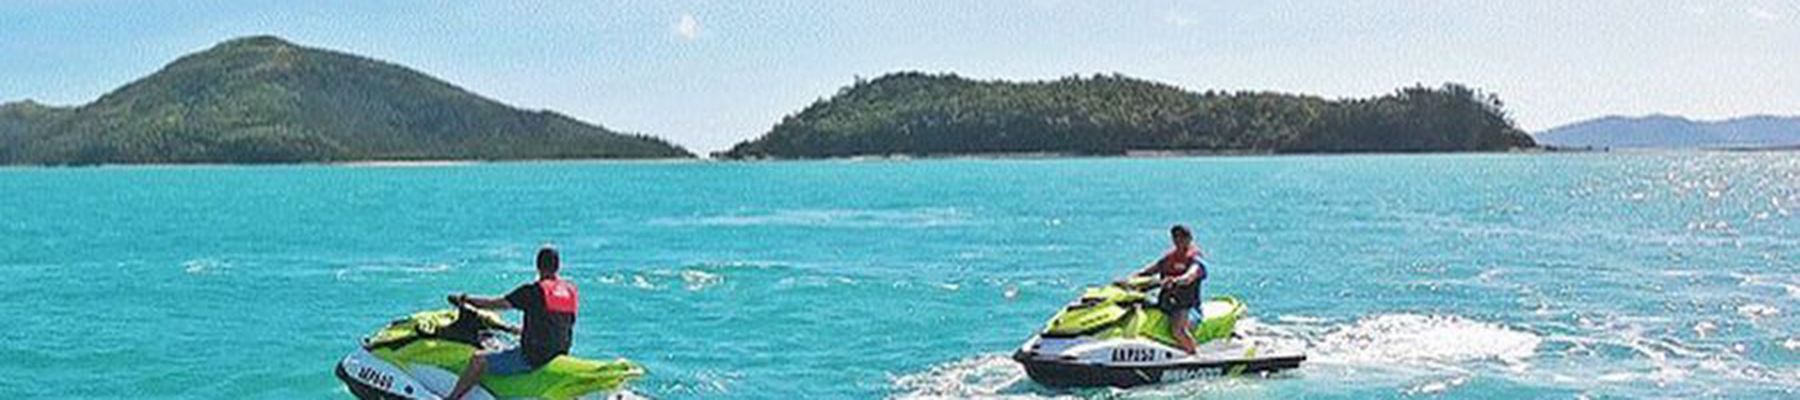 Two people zooming through waters on jet skis Whitsundays